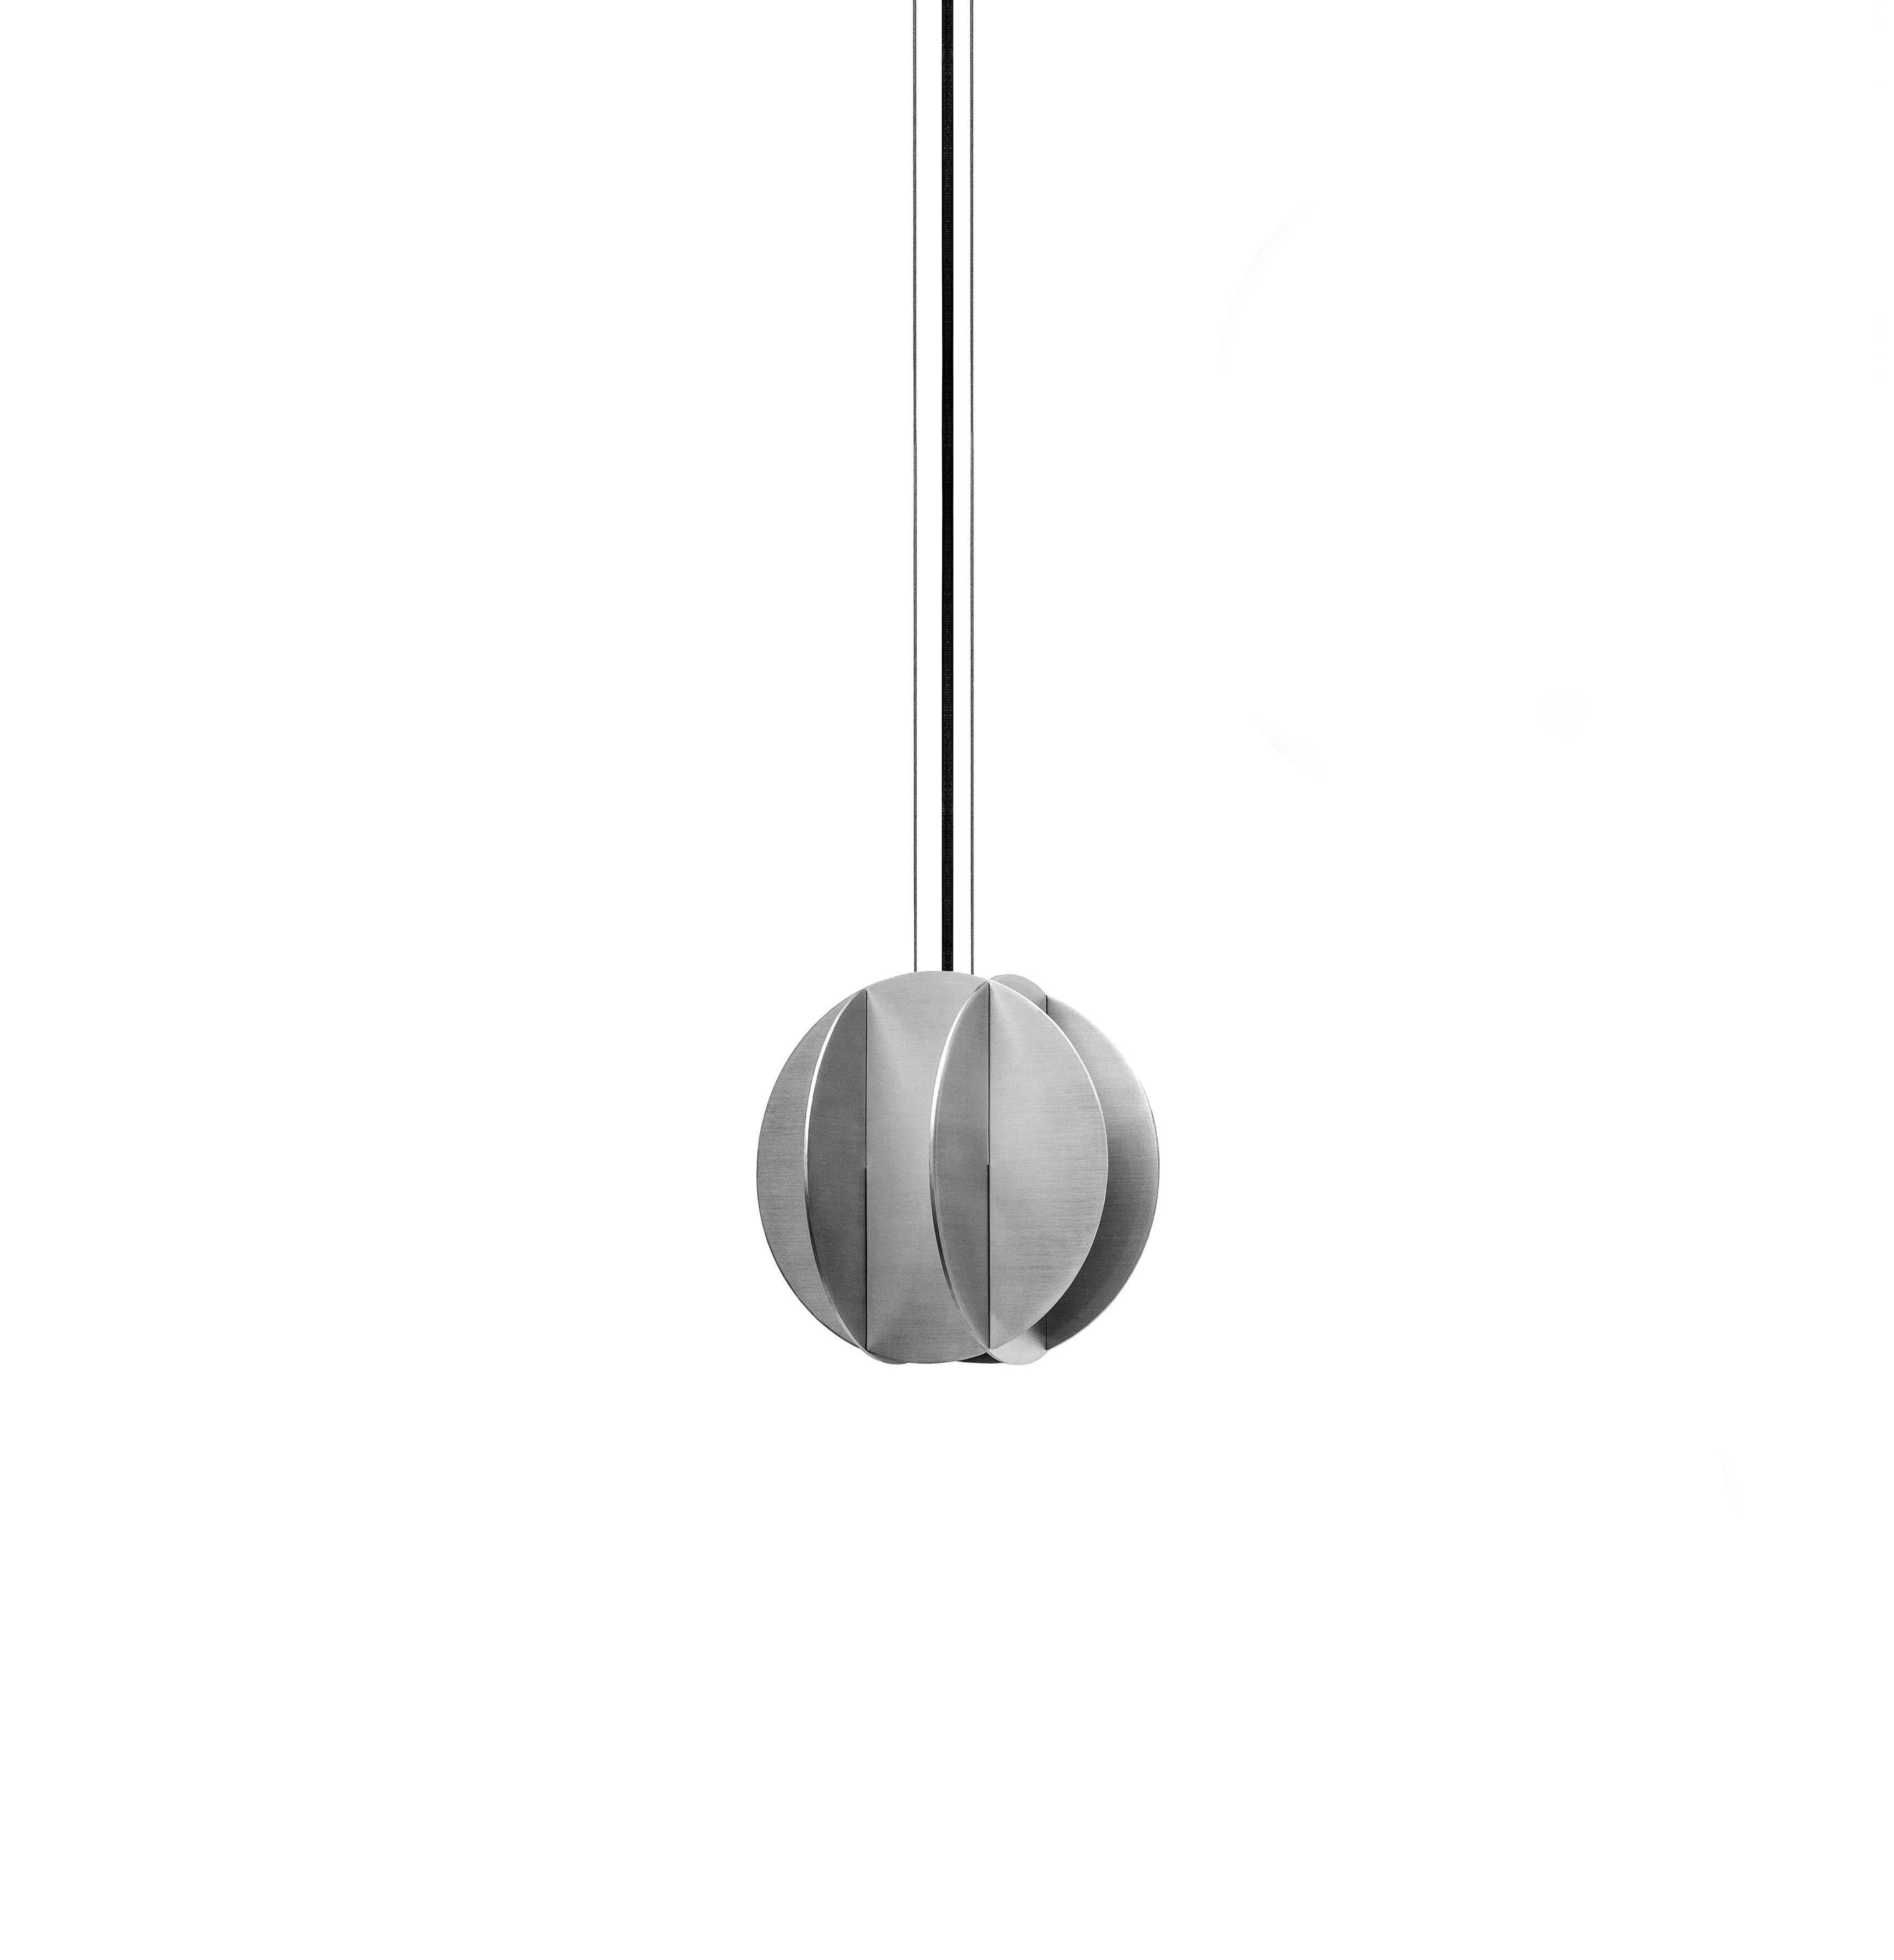 Brushed Set of Three Contemporary Pendant Lamp El Lamps CS3 by Noom in Stainless Steel